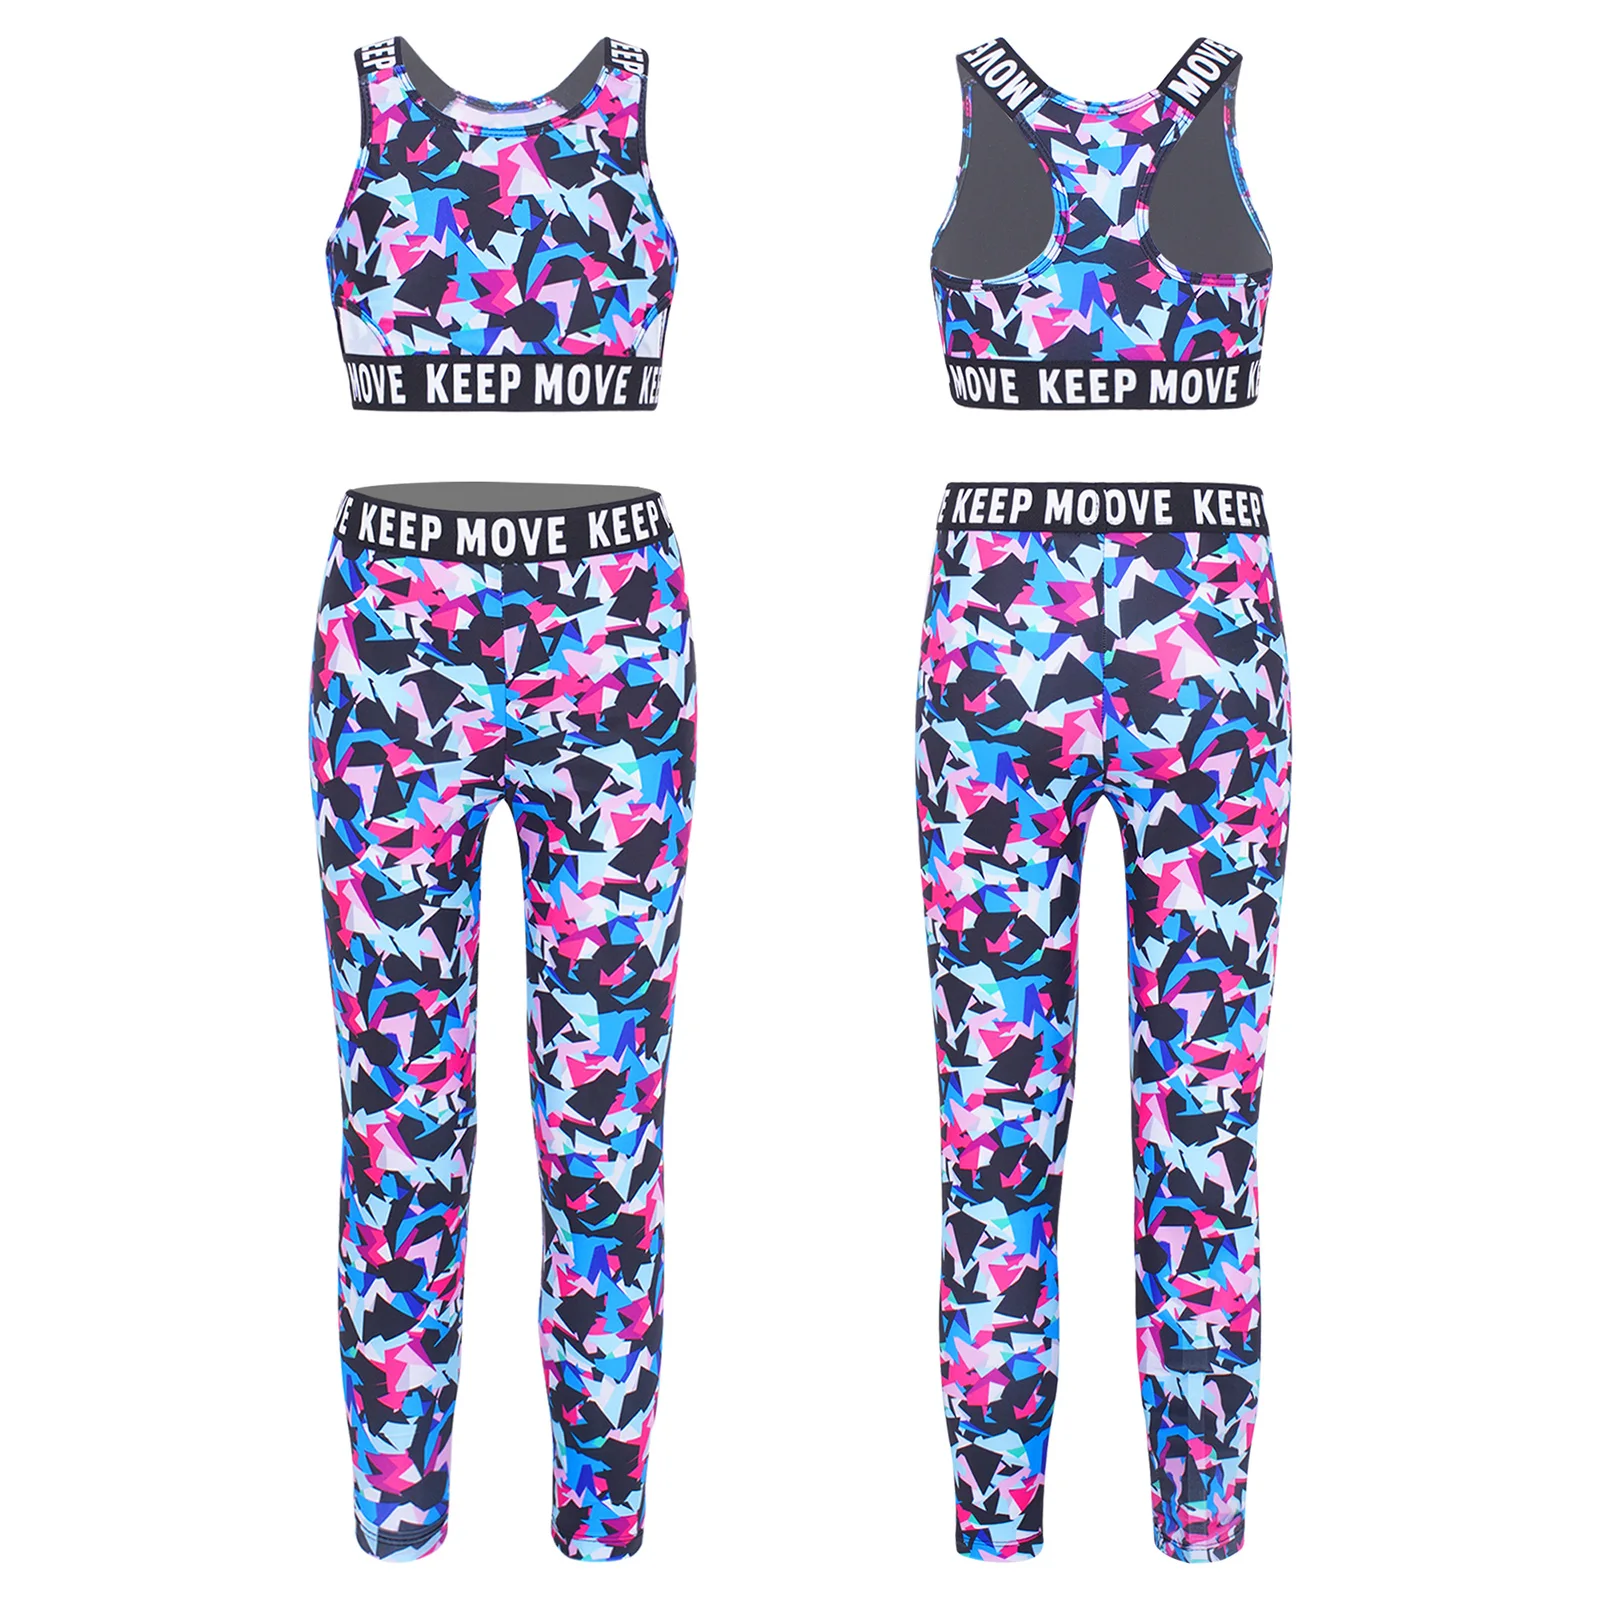 winying Child Girls Athletic Crop Tops Leggings Set 2 Pieces Summer Workout Tracksuit Gym Yoga Dance Sports 